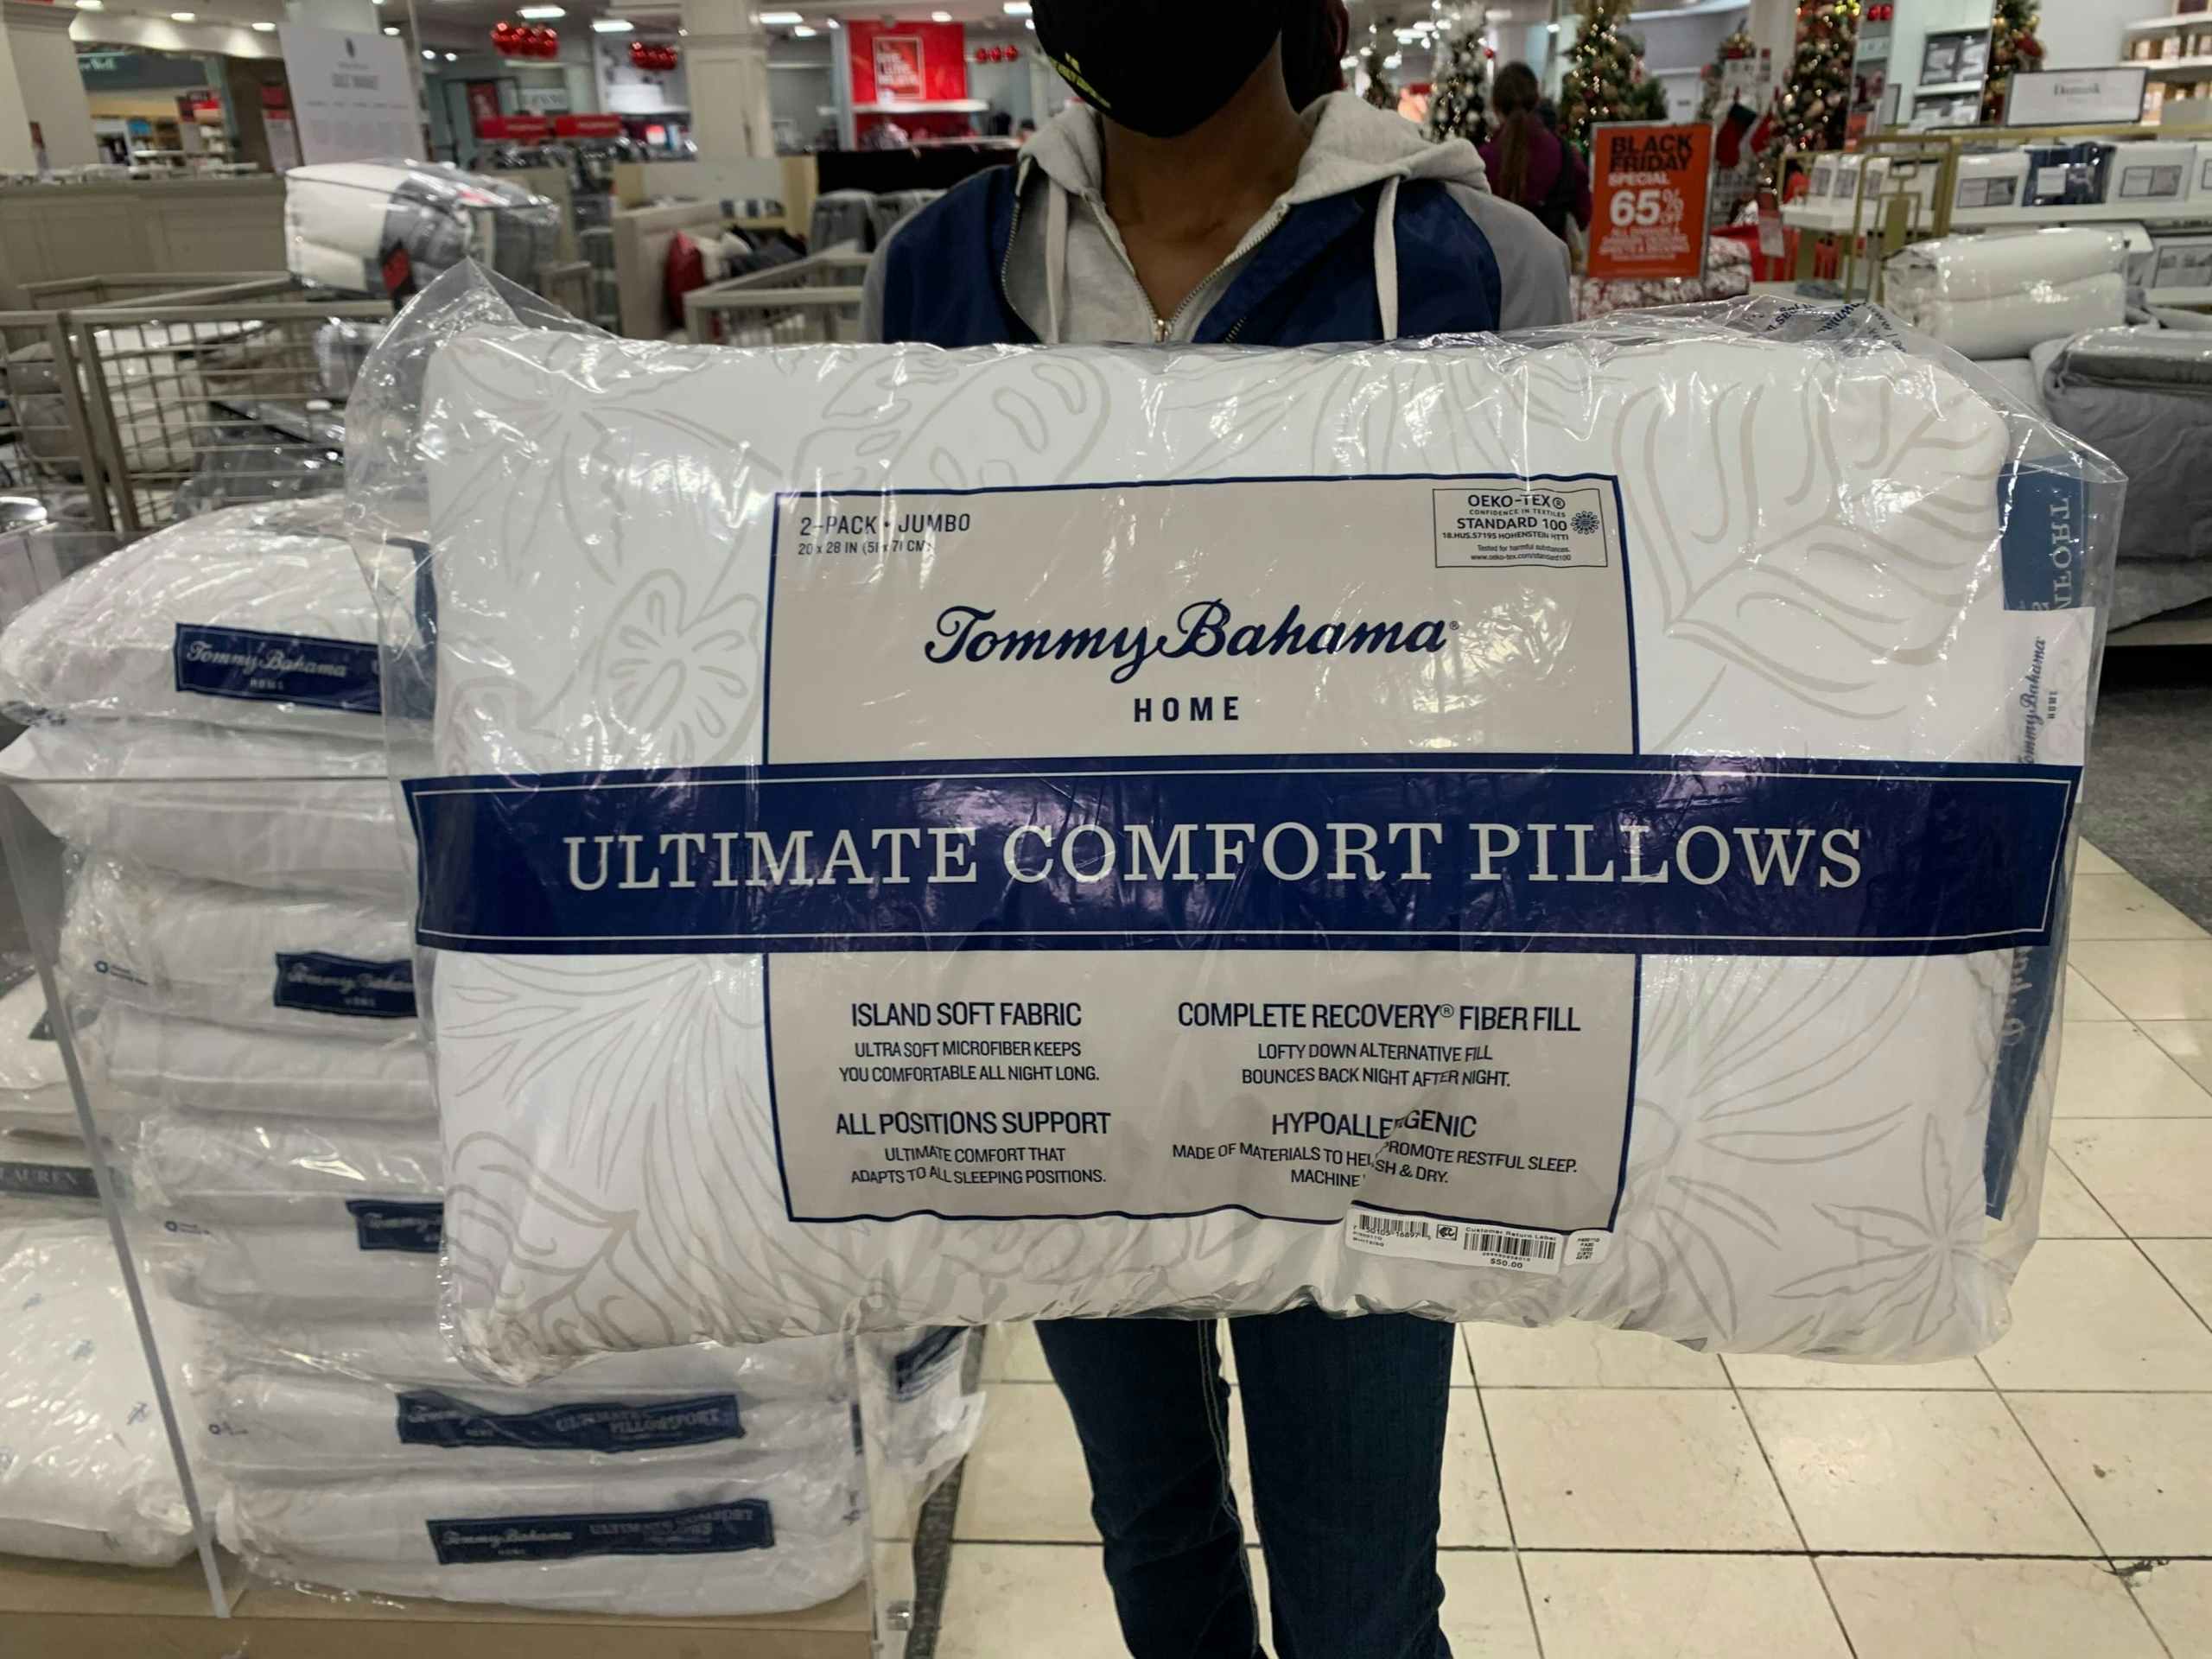 macys-black-friday-tommy-bahama-home-ultimate-comfort-pillows-2020-1606160733-1606160733-scaled